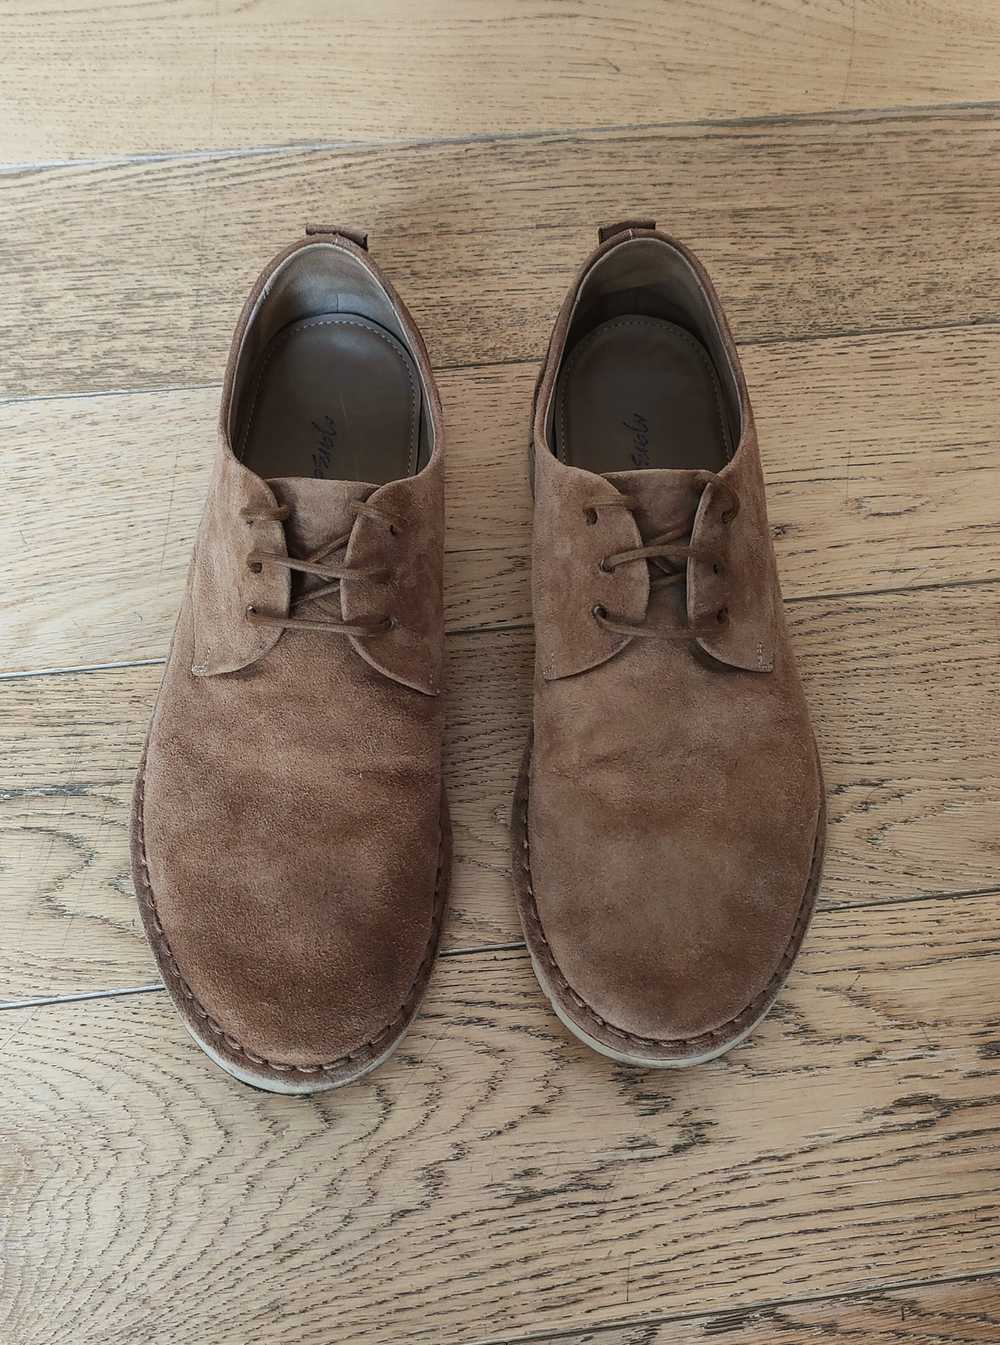 Marsell Marsell suede leather lace-up derby shoes - image 3